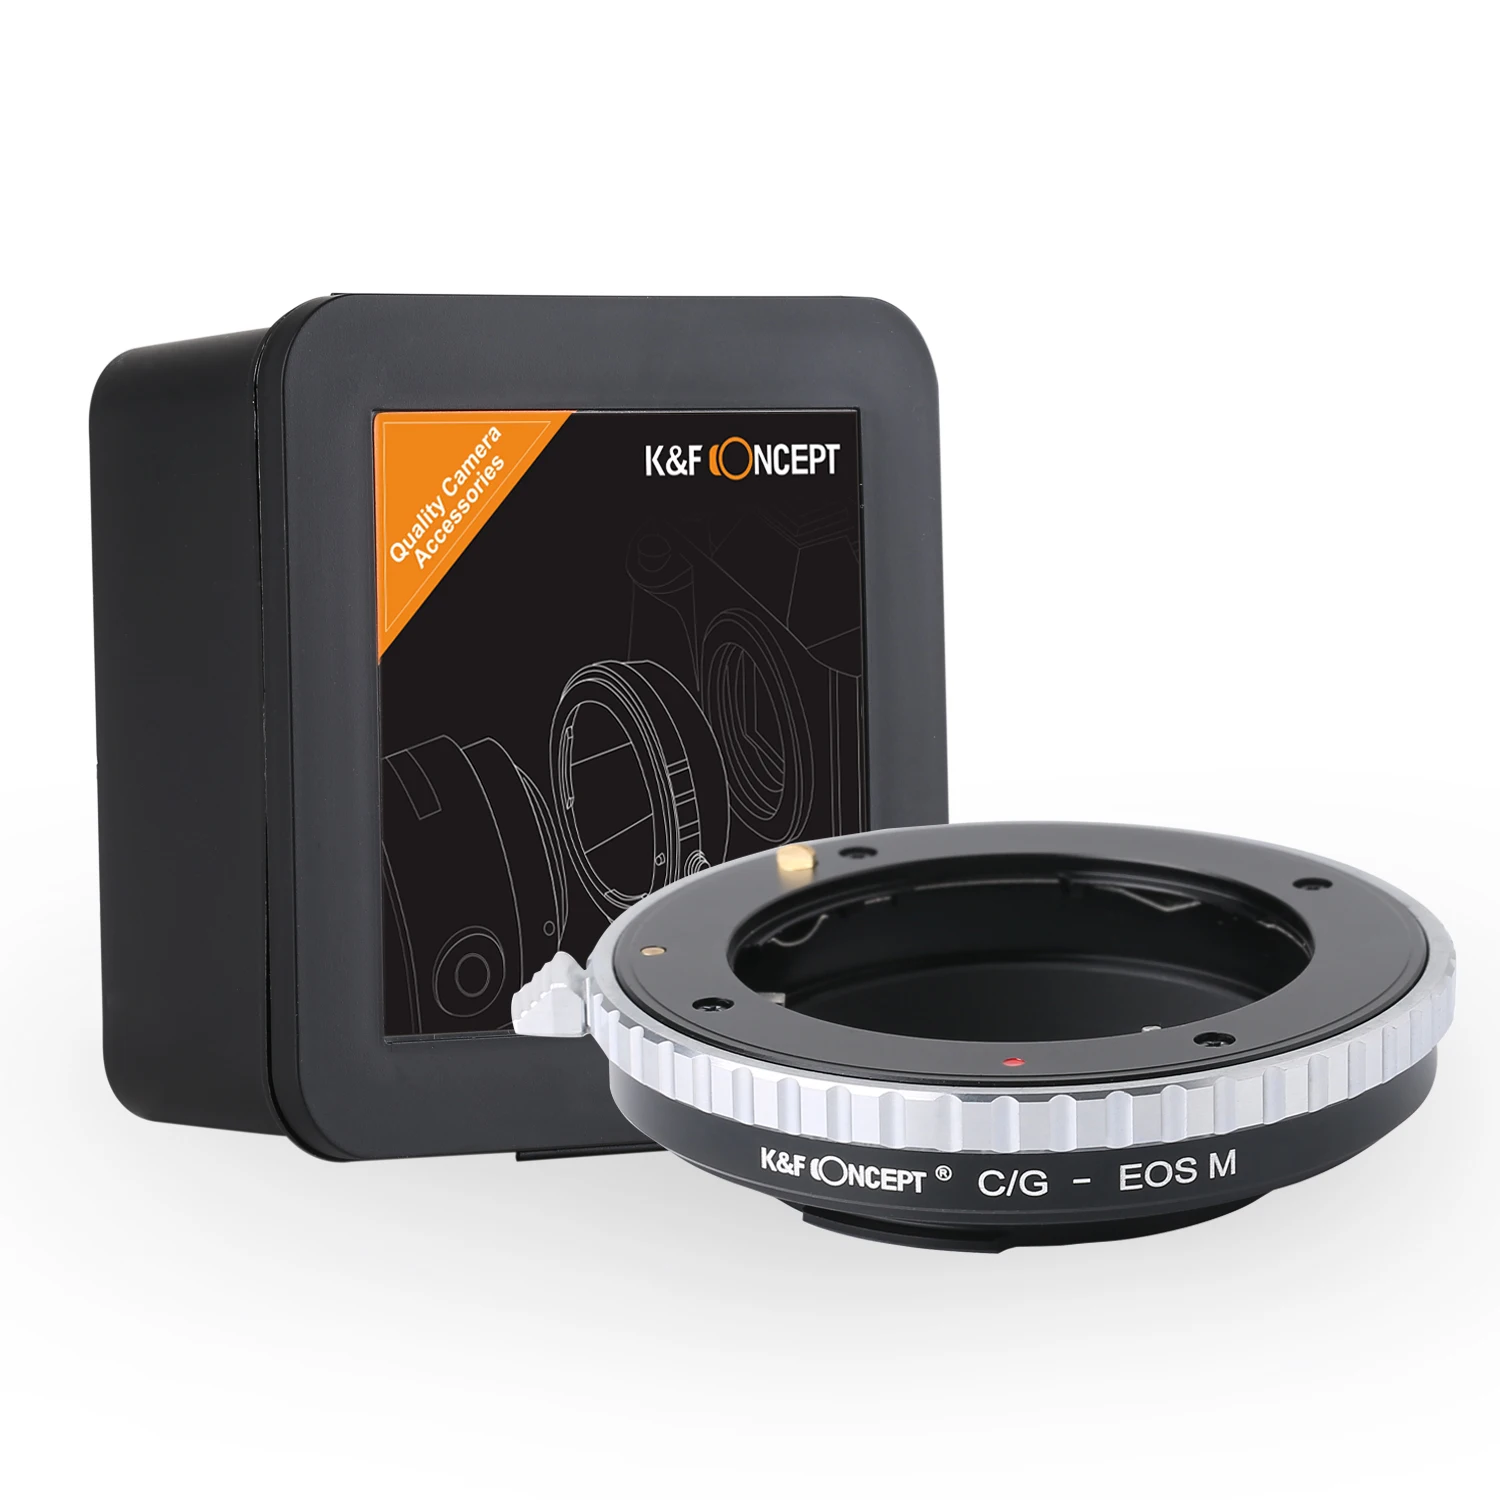 

K&F Concept Lens Adapter for CG mount lens to Canon EOS M camera M1 M2 M3 M5 M6 M50 M100